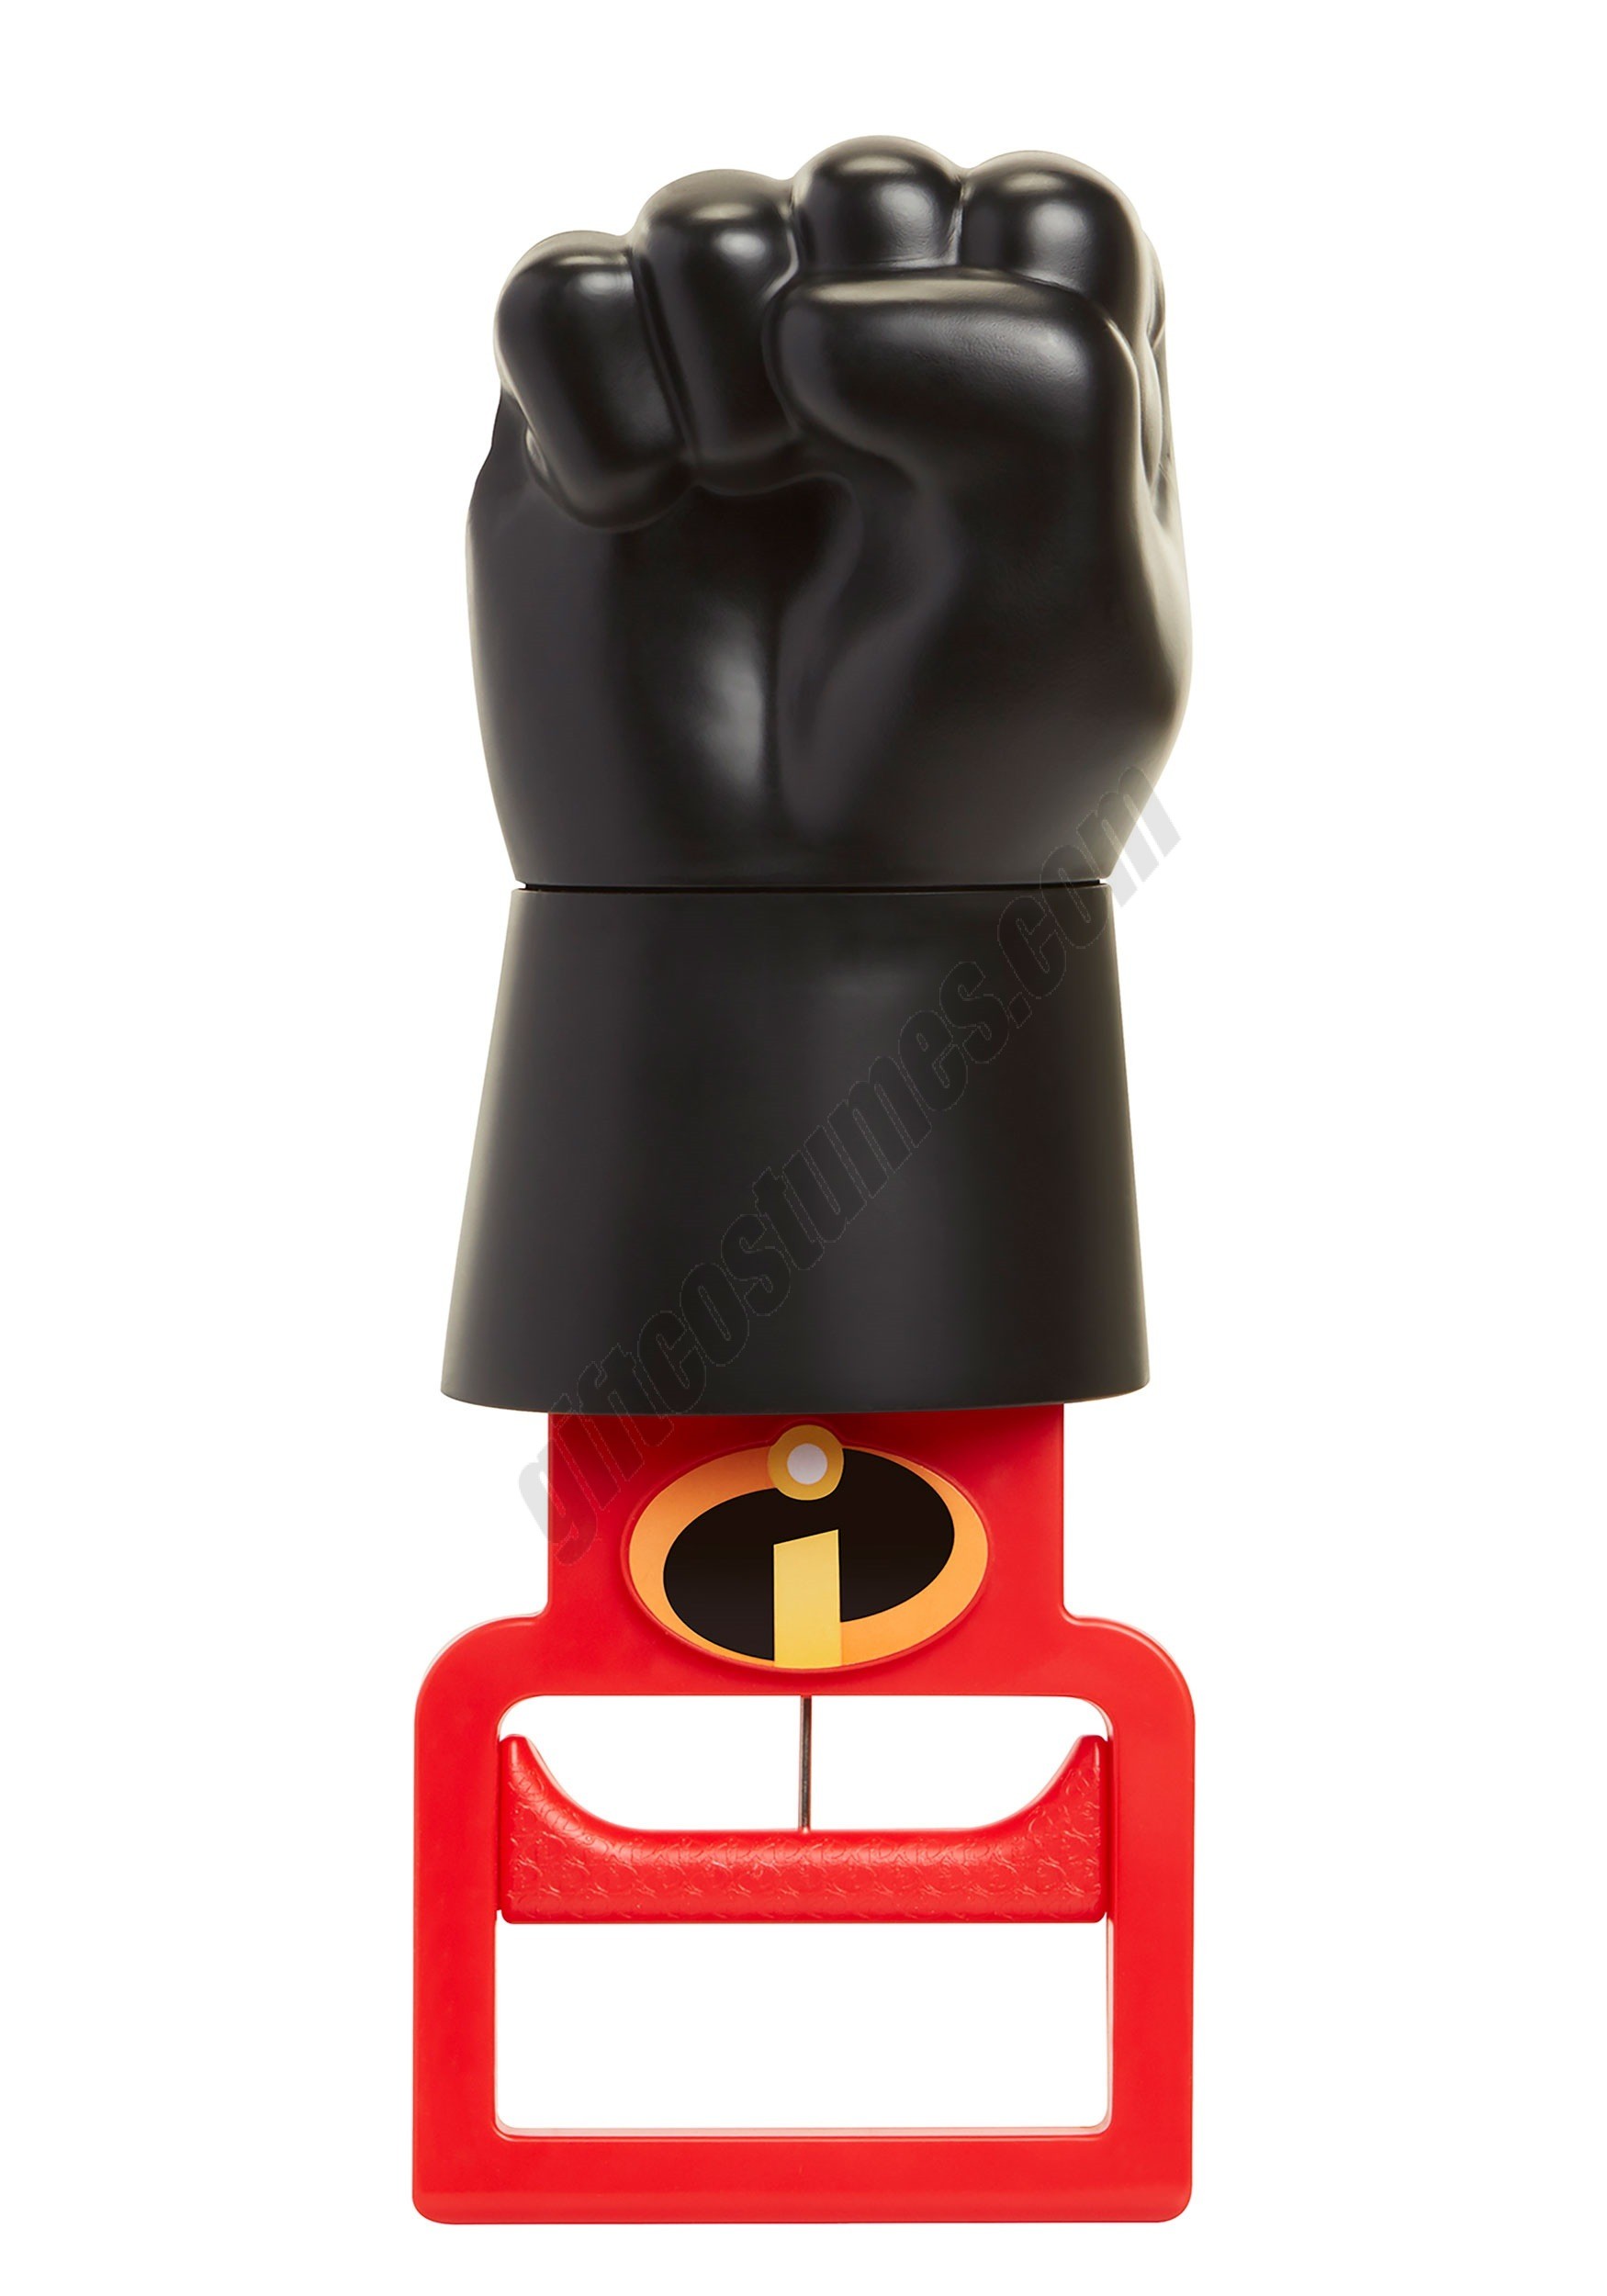 Incredibles 2 Elasti-Arm Child Size Promotions - Incredibles 2 Elasti-Arm Child Size Promotions